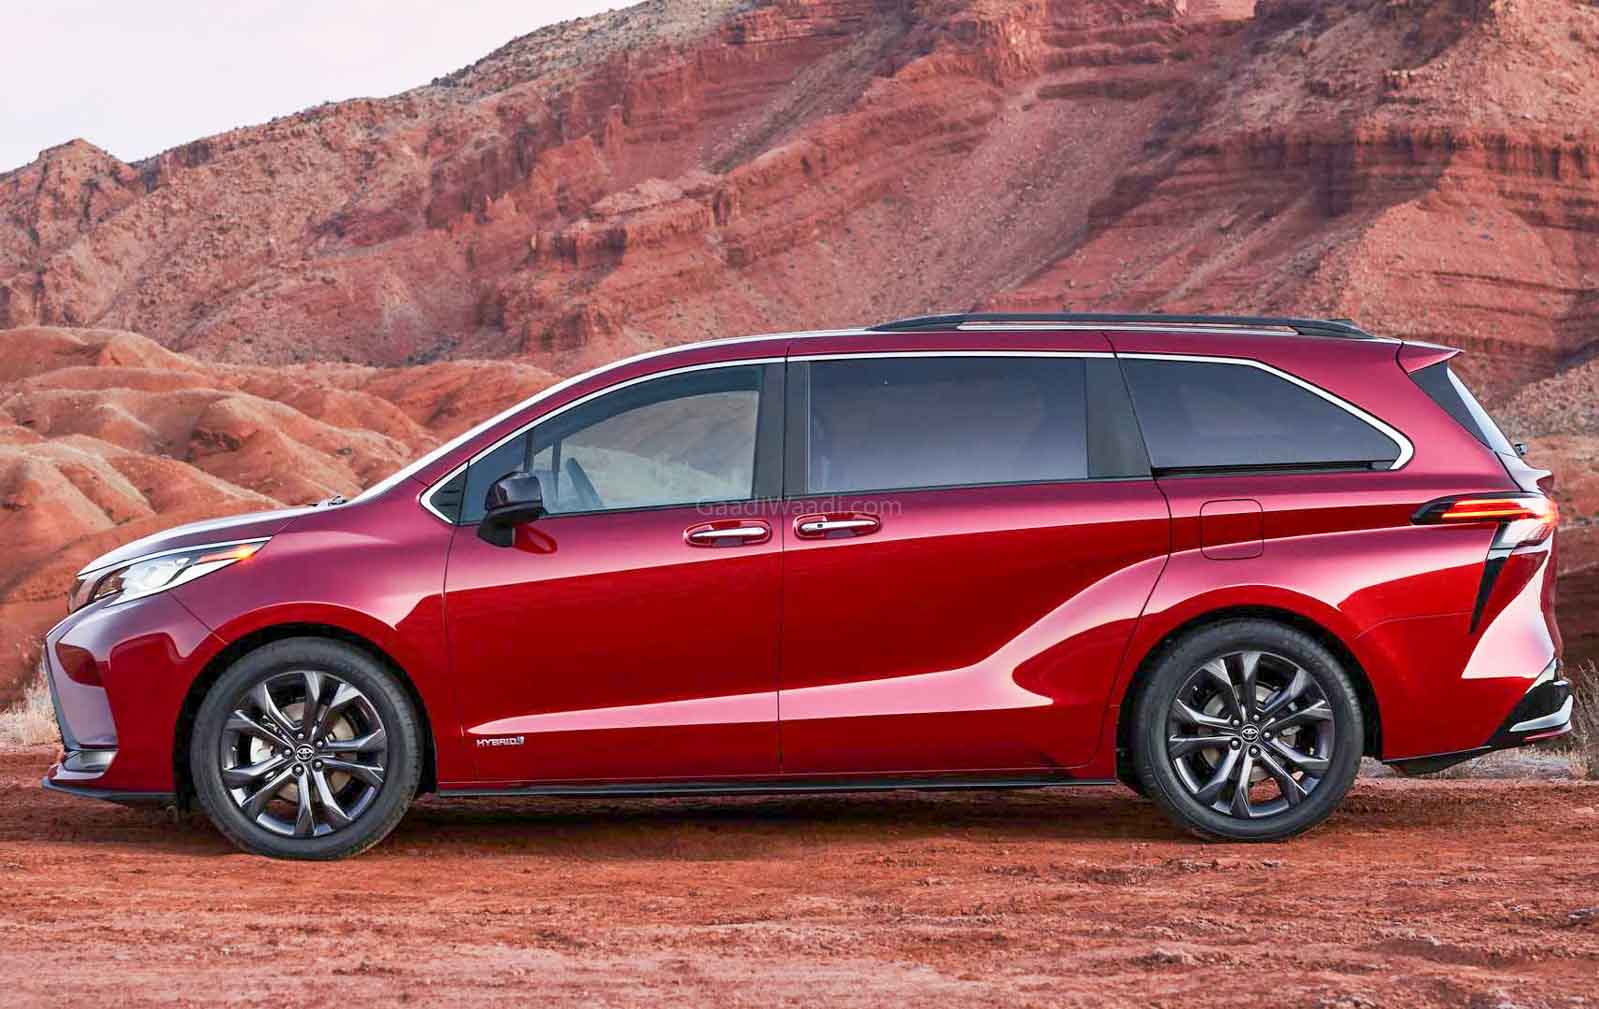 All New 2021 Toyota Sienna Hybrid MPV With 2 Electric Motors Revealed